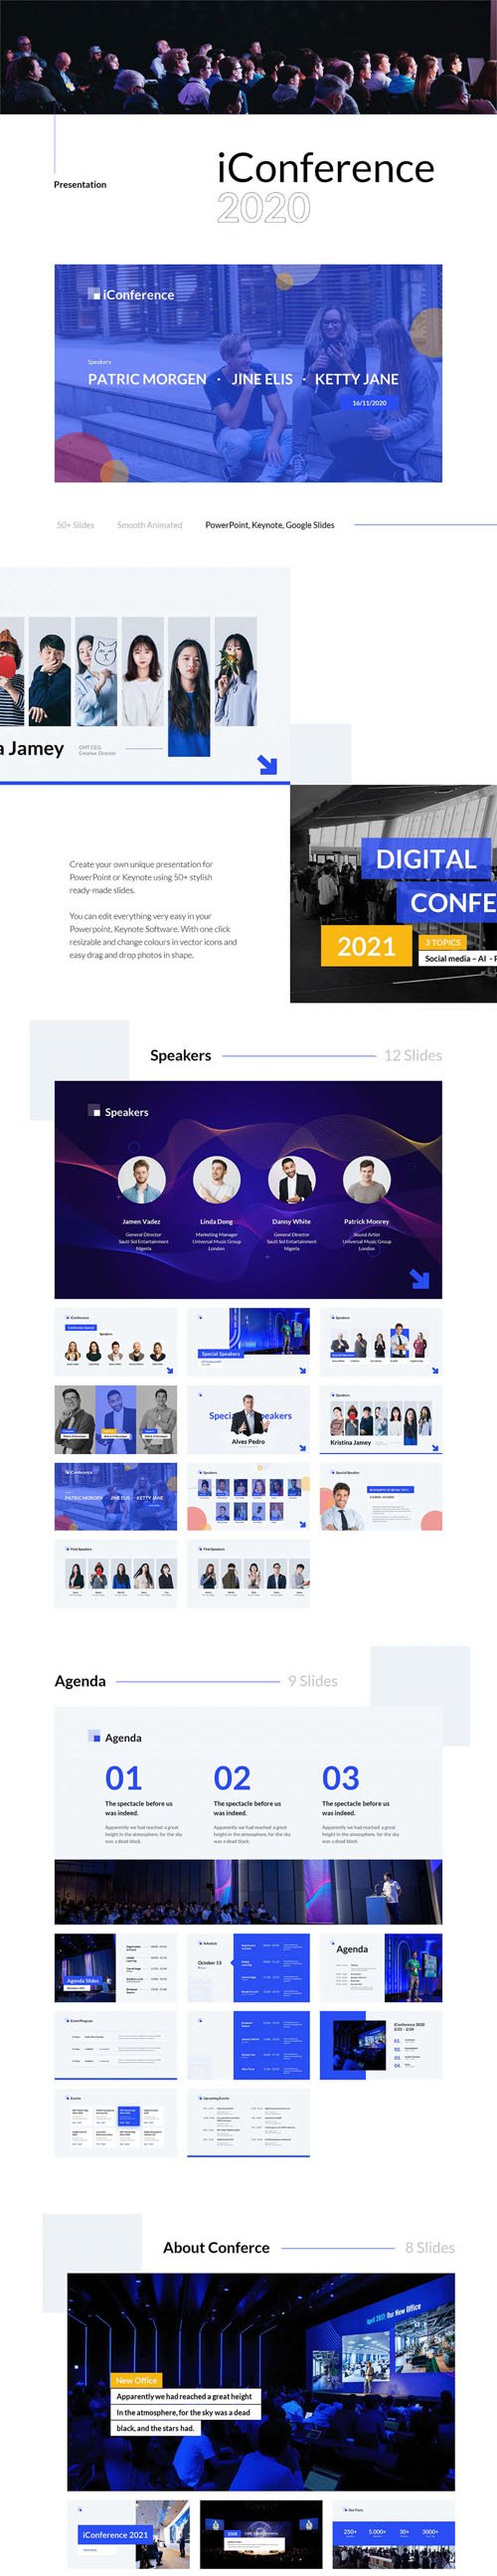 iConference 2020 Powerpoint Presentation Template